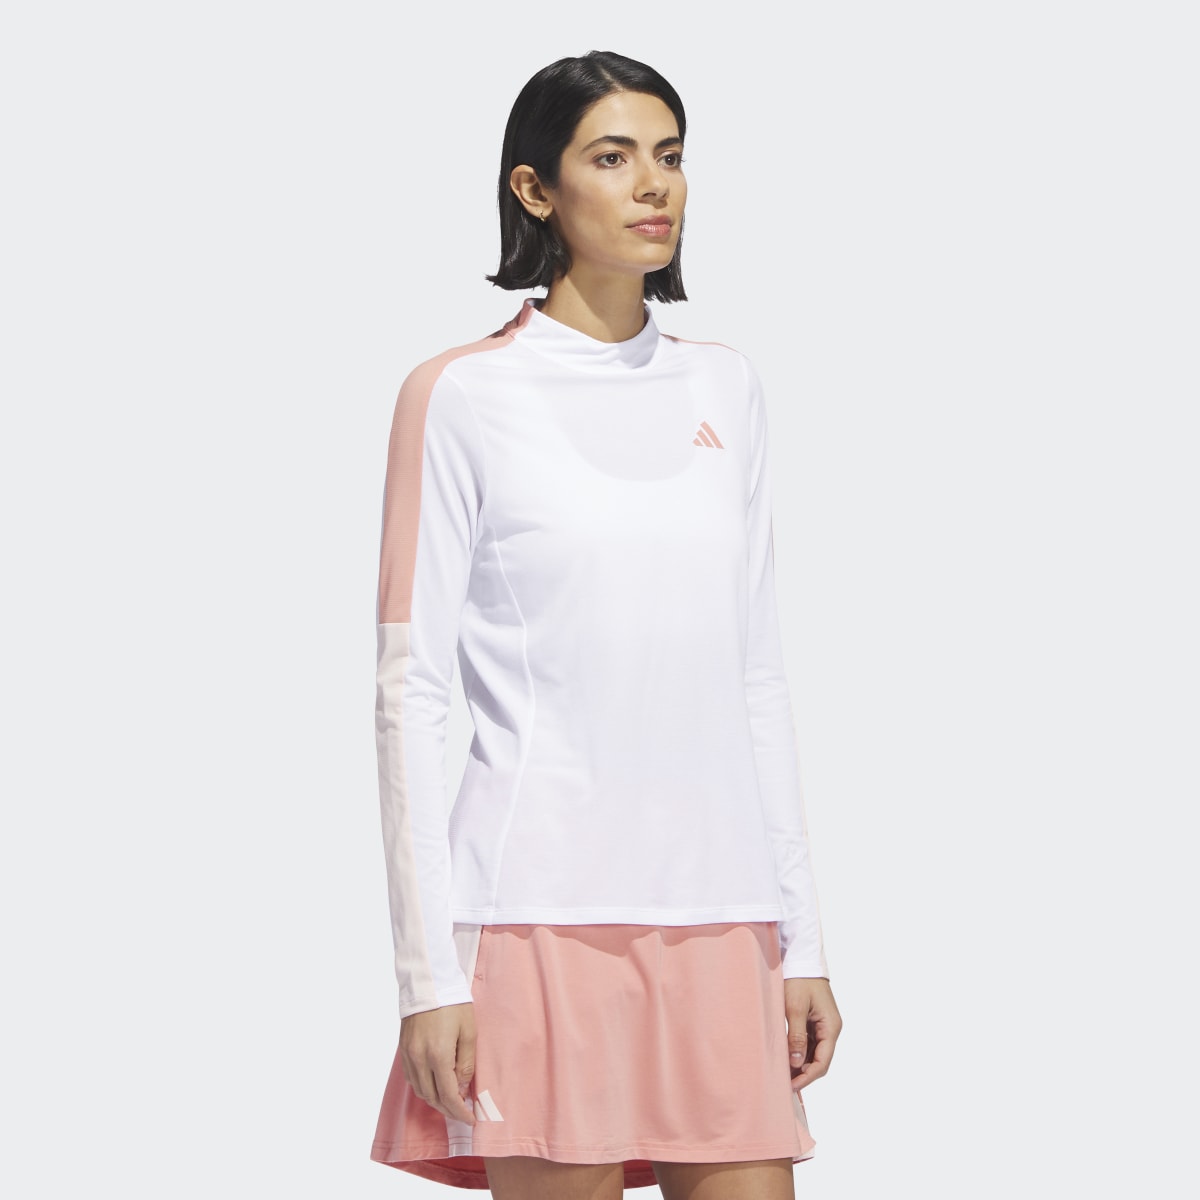 Adidas Made With Nature Mock Neck Tee. 4